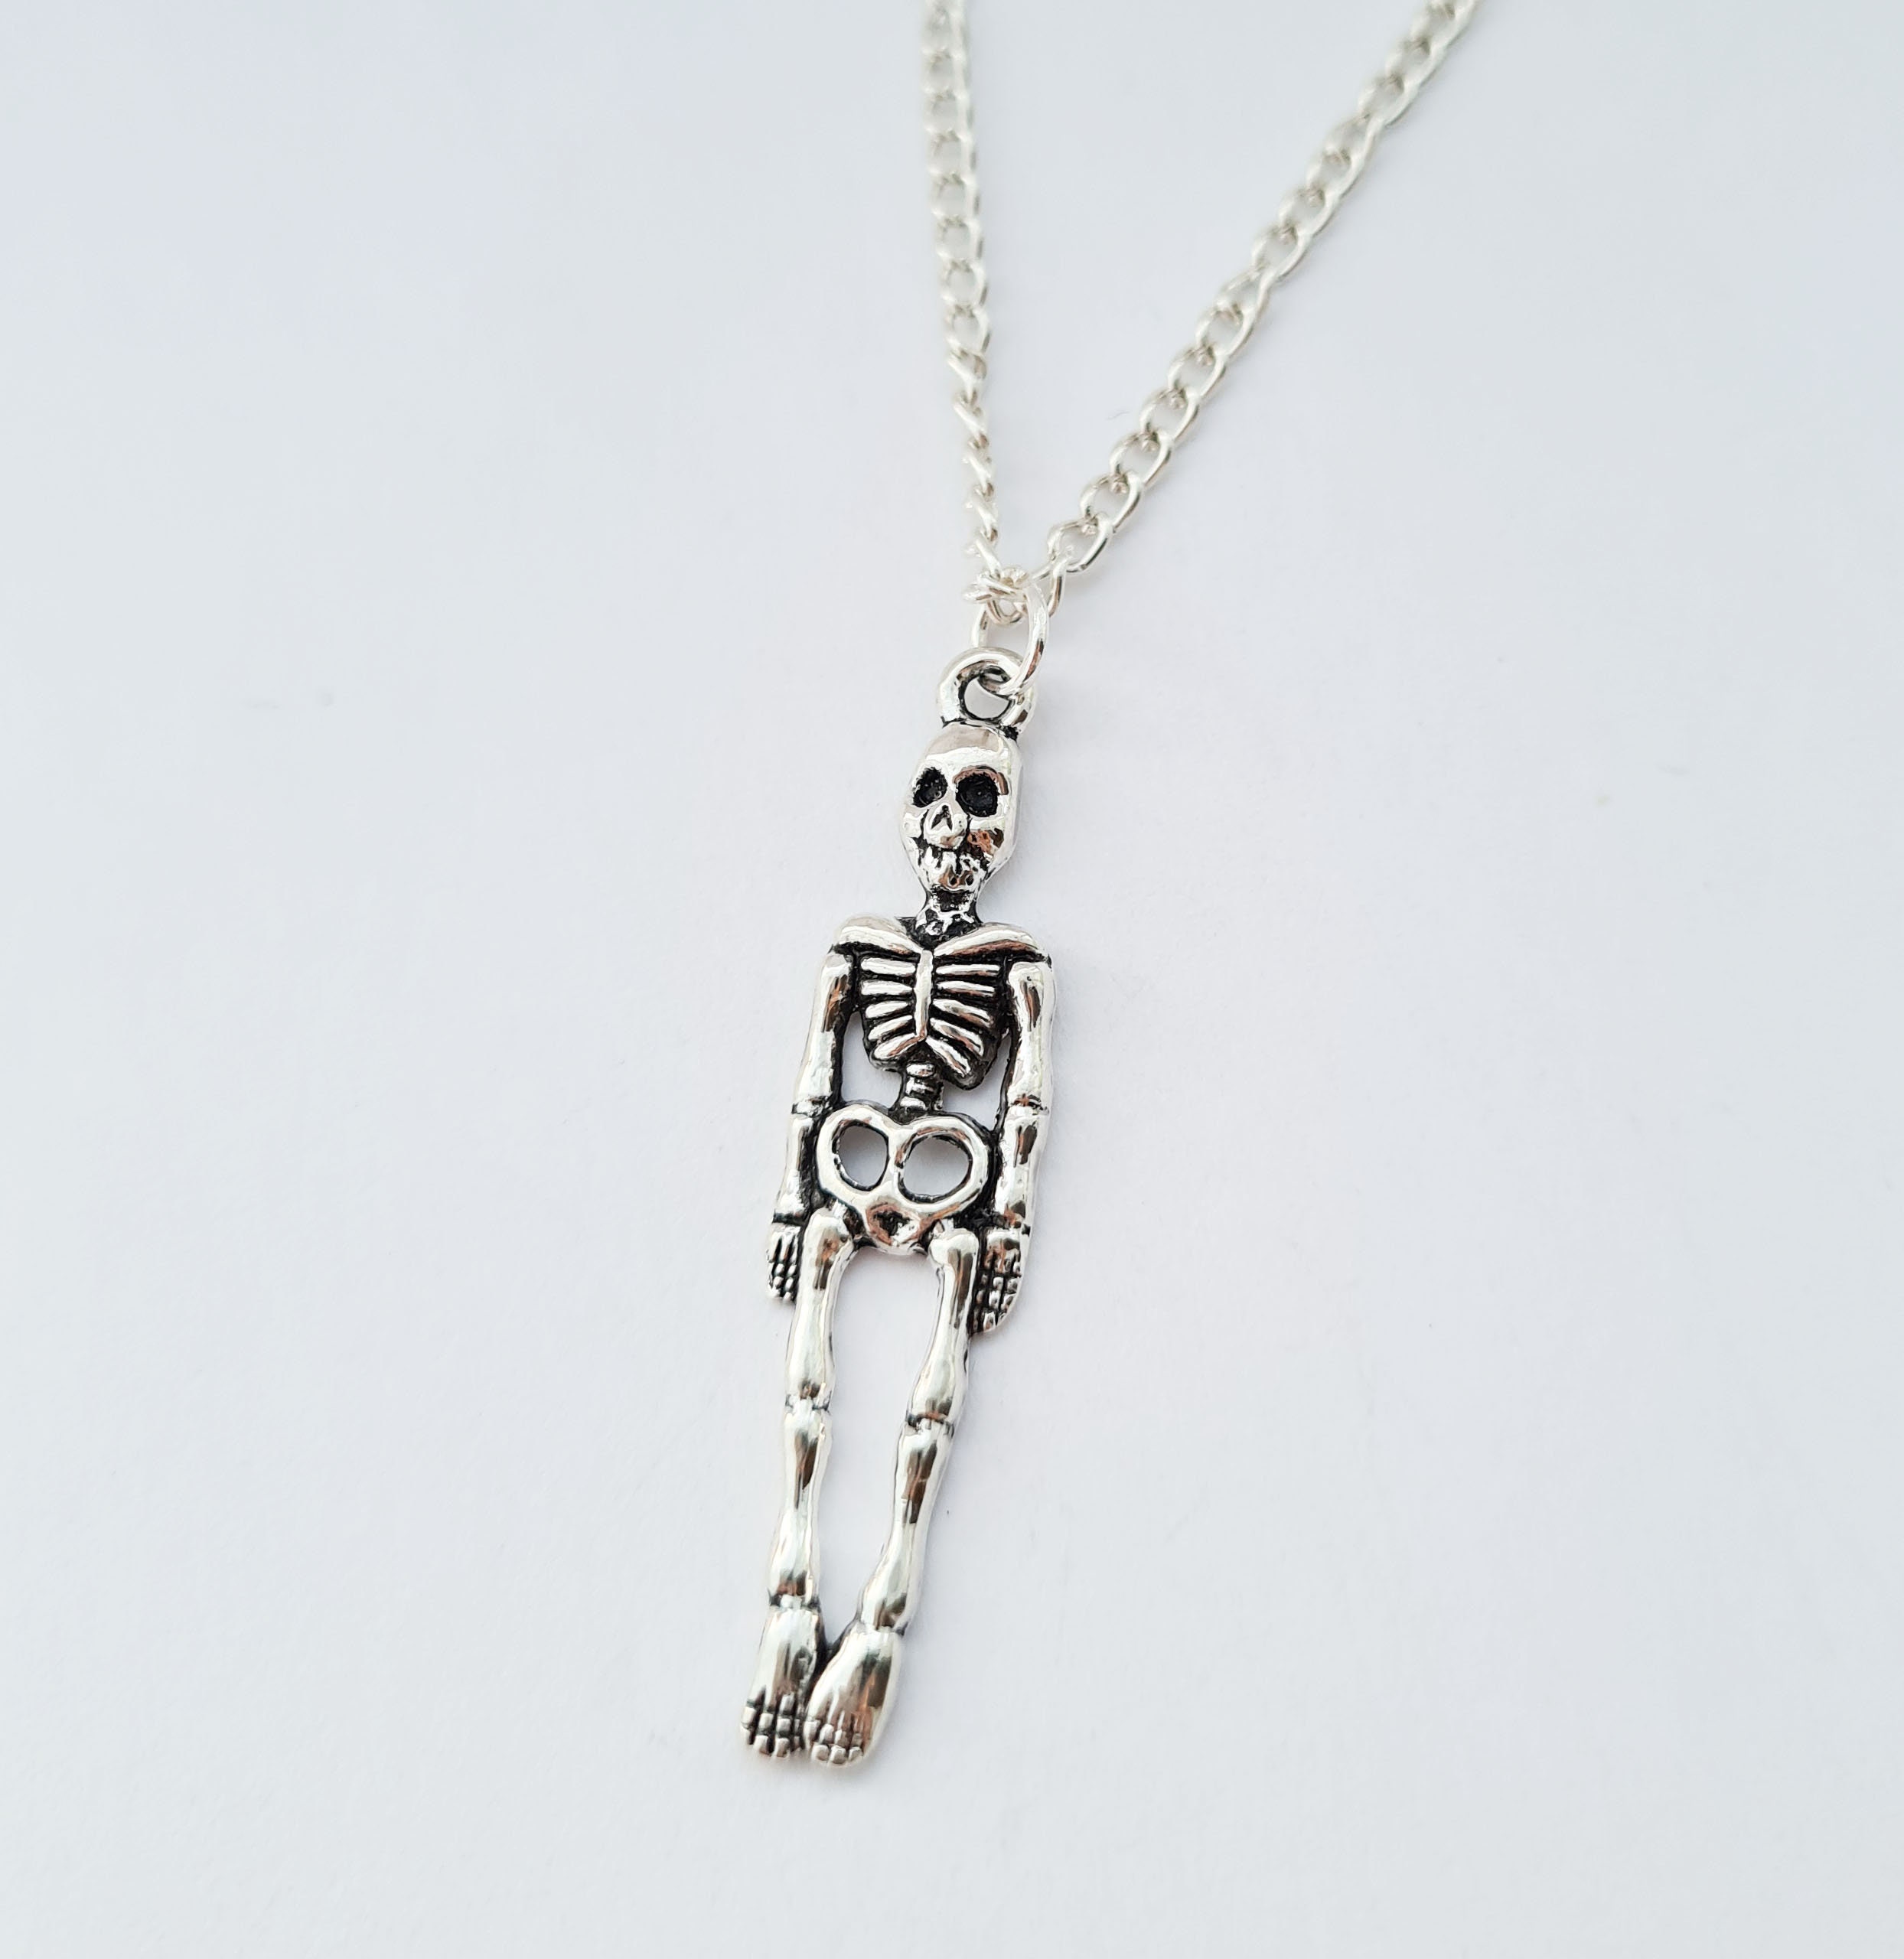 Urban Skeleton with Gesture on Skateboard Silver Pewter Pendant Neckla –  Real Metal Jewelry